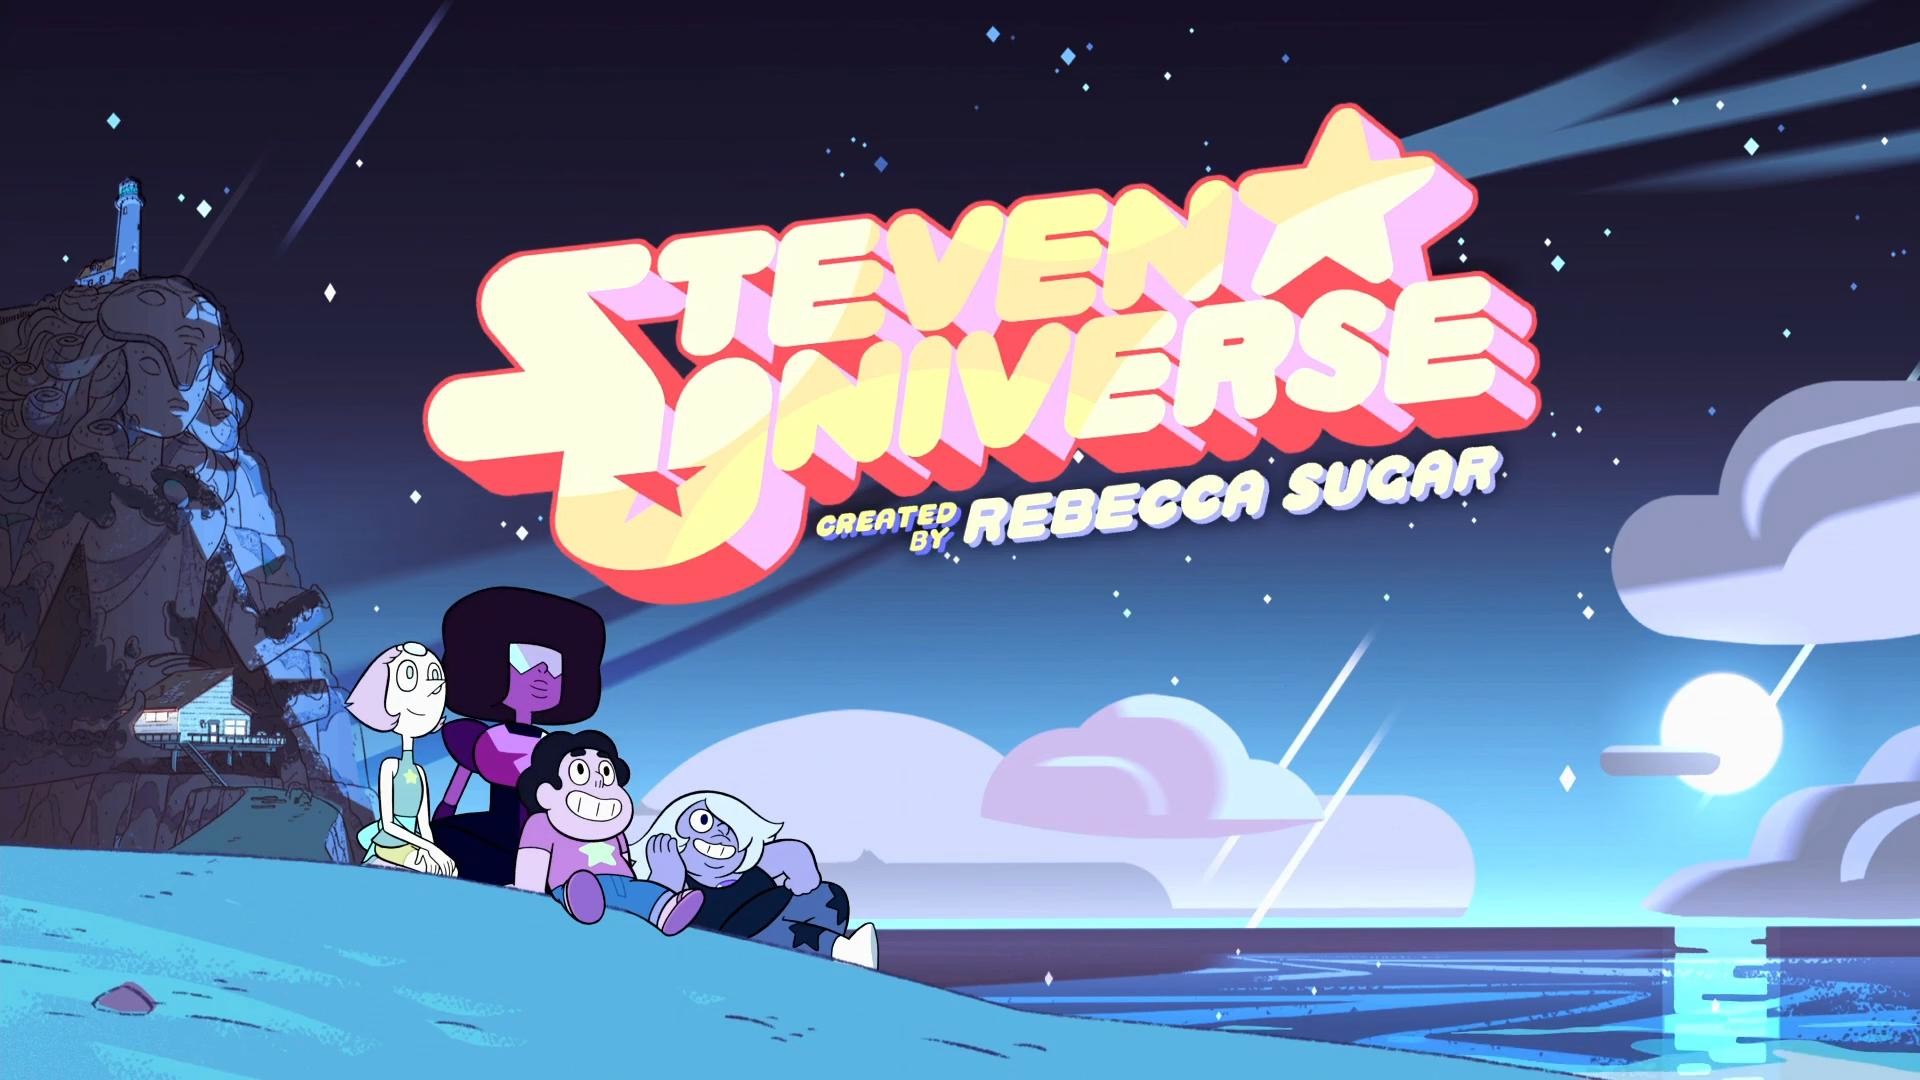 1920x1080 97 Steven Universe wallpapers! 1920 x 1080 (mostly)